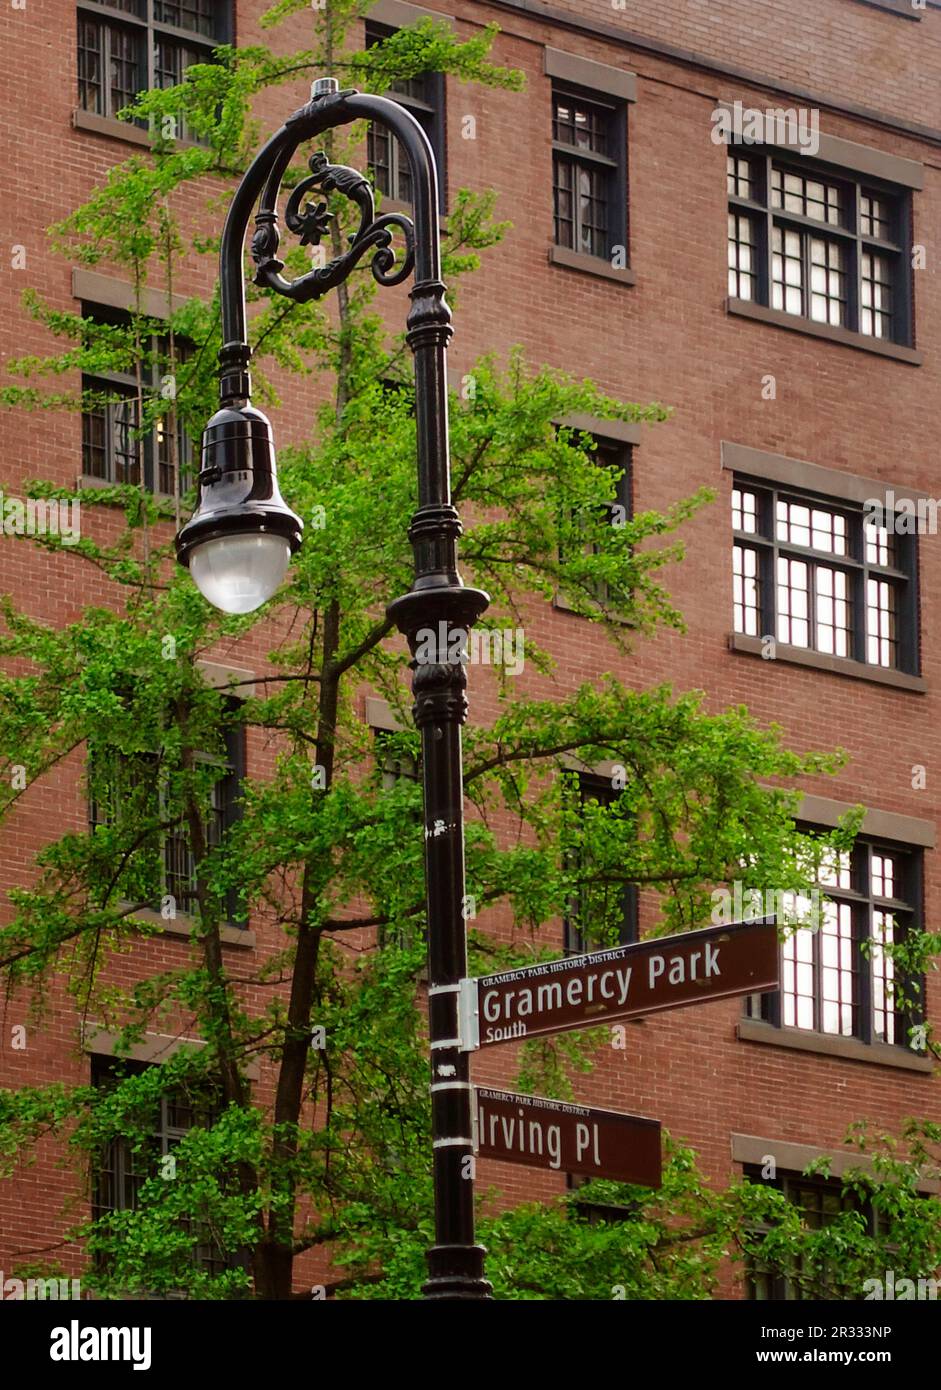 Gramercy park and Irving Place street signs in Manhattan NYC Stock Photo